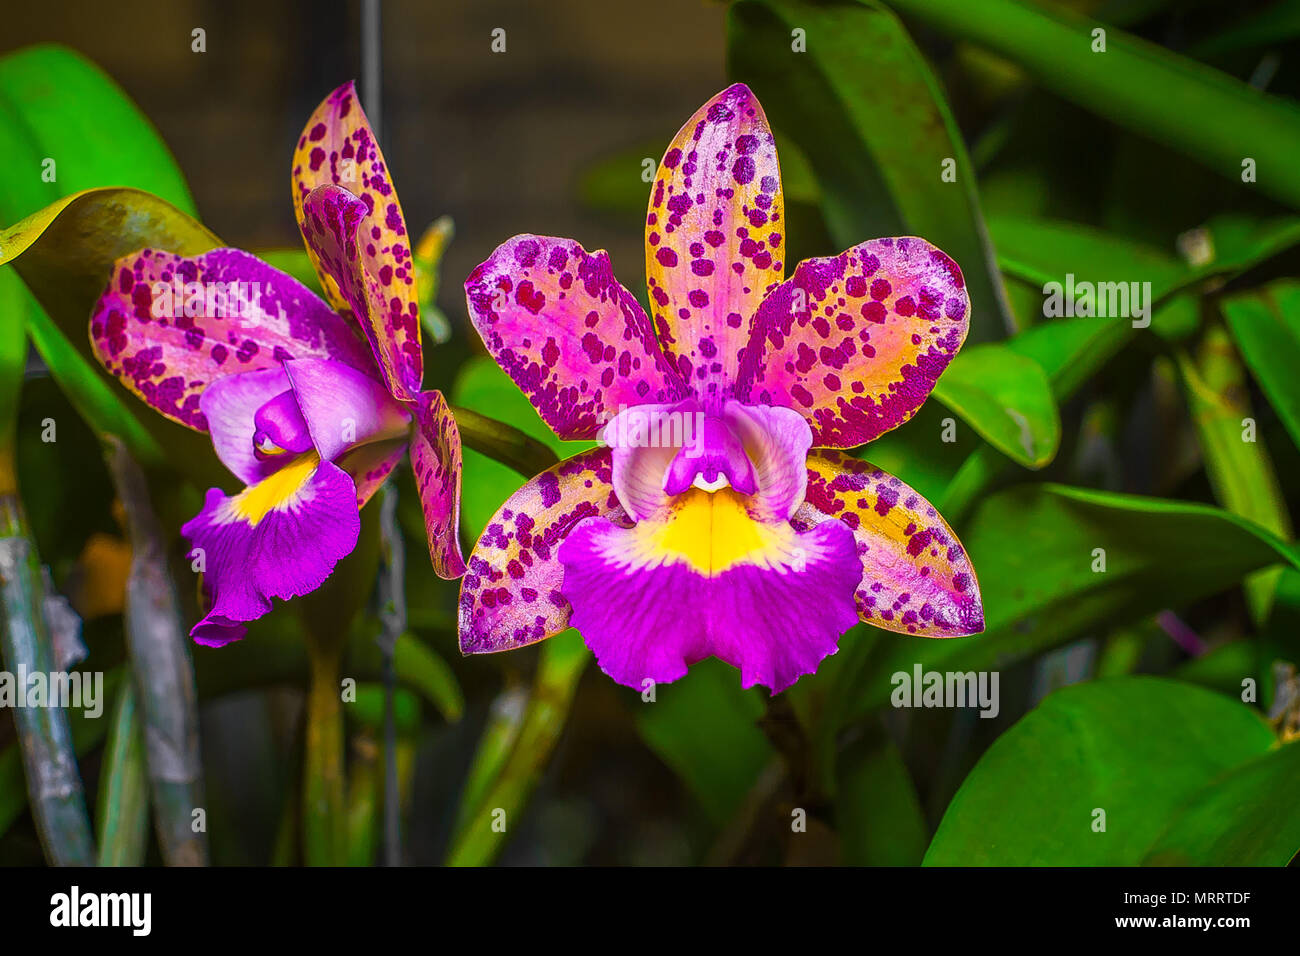 Cattleya Pink Jaguar is a colorful starfish-shaped orchid. The bloom has yellow and orange color with purple freckles. The lip is yellow and purple. Stock Photo